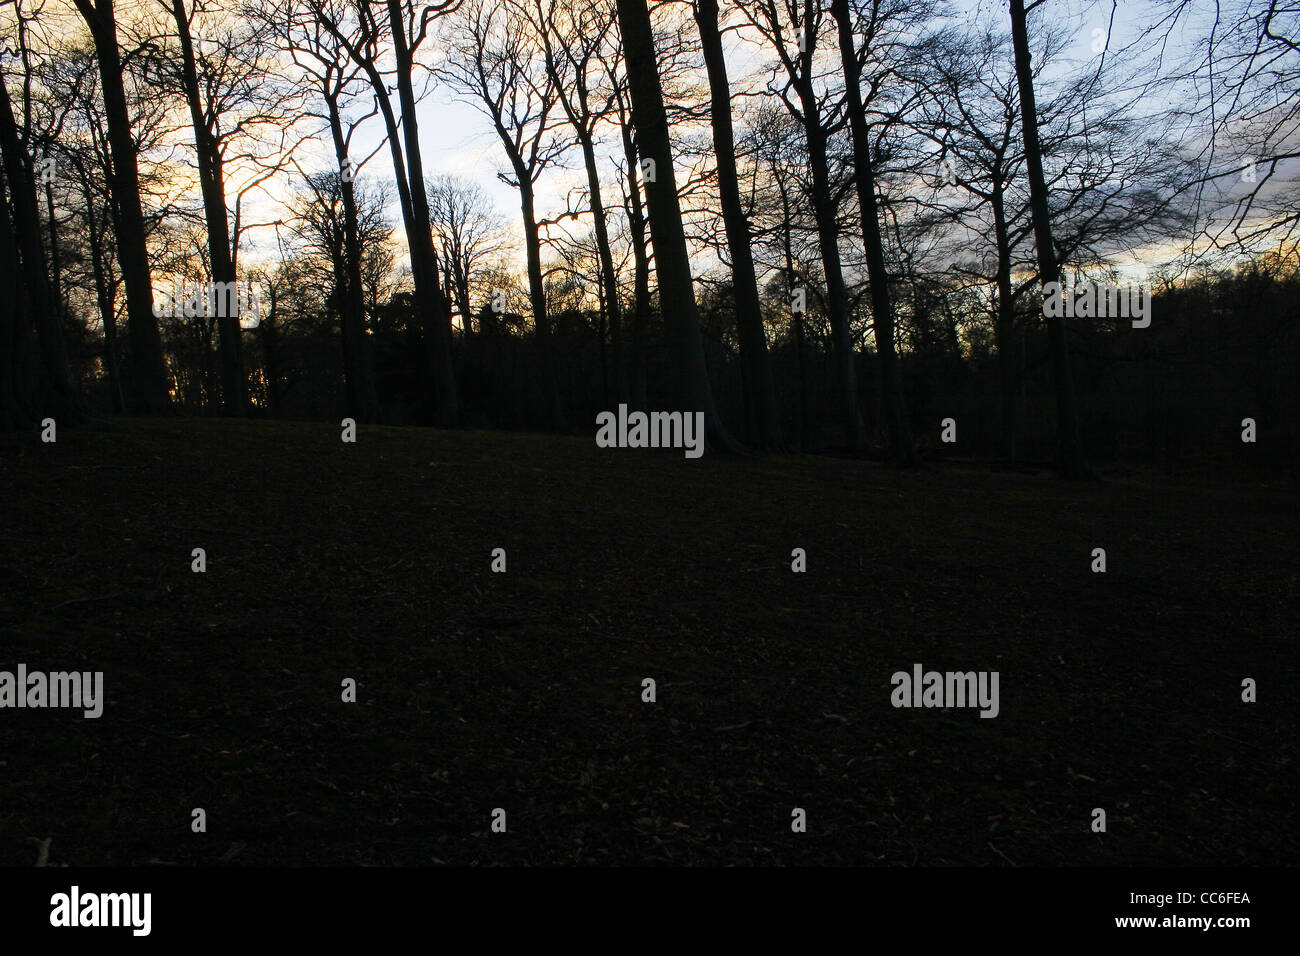 silhouette of trees in forest near Sparken Hill, Worksop, Notts, England, UK Stock Photo